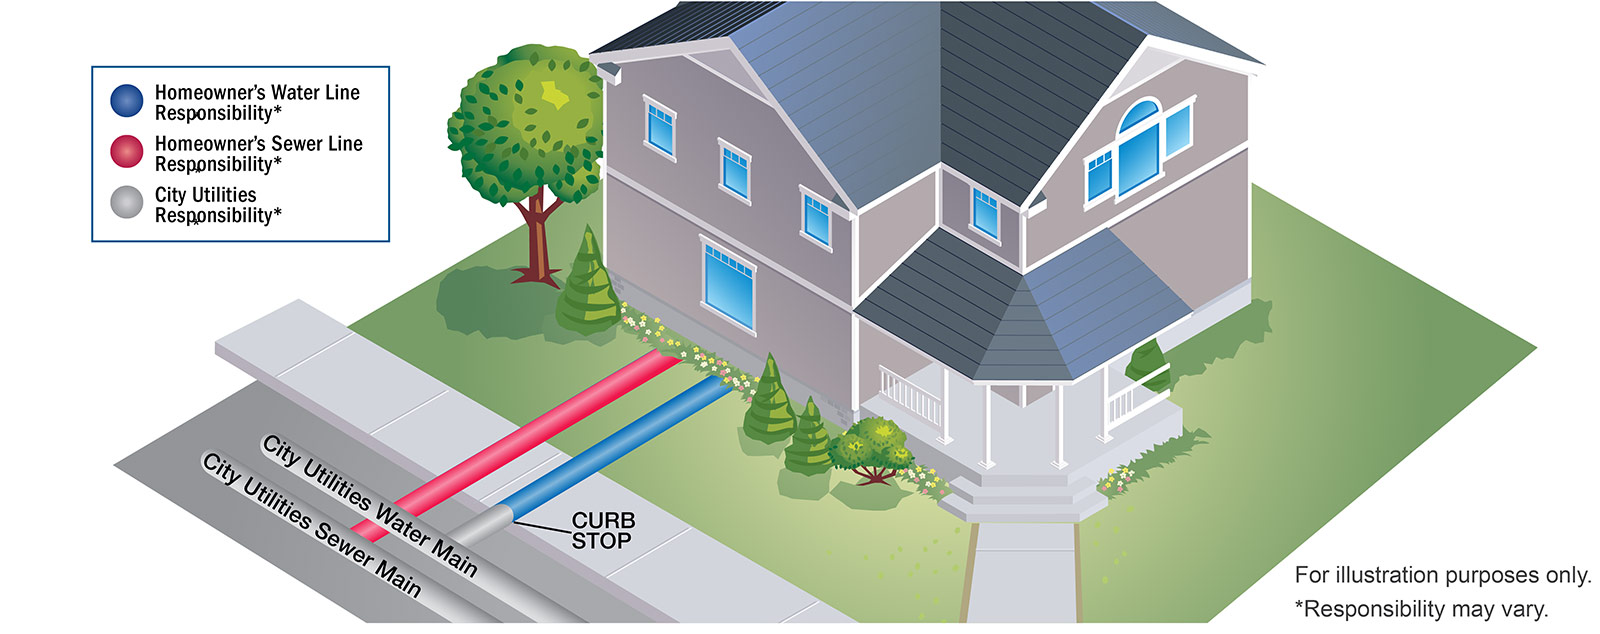 Illustration of Homeowner vs City Utilities water and sewer line responsibilities